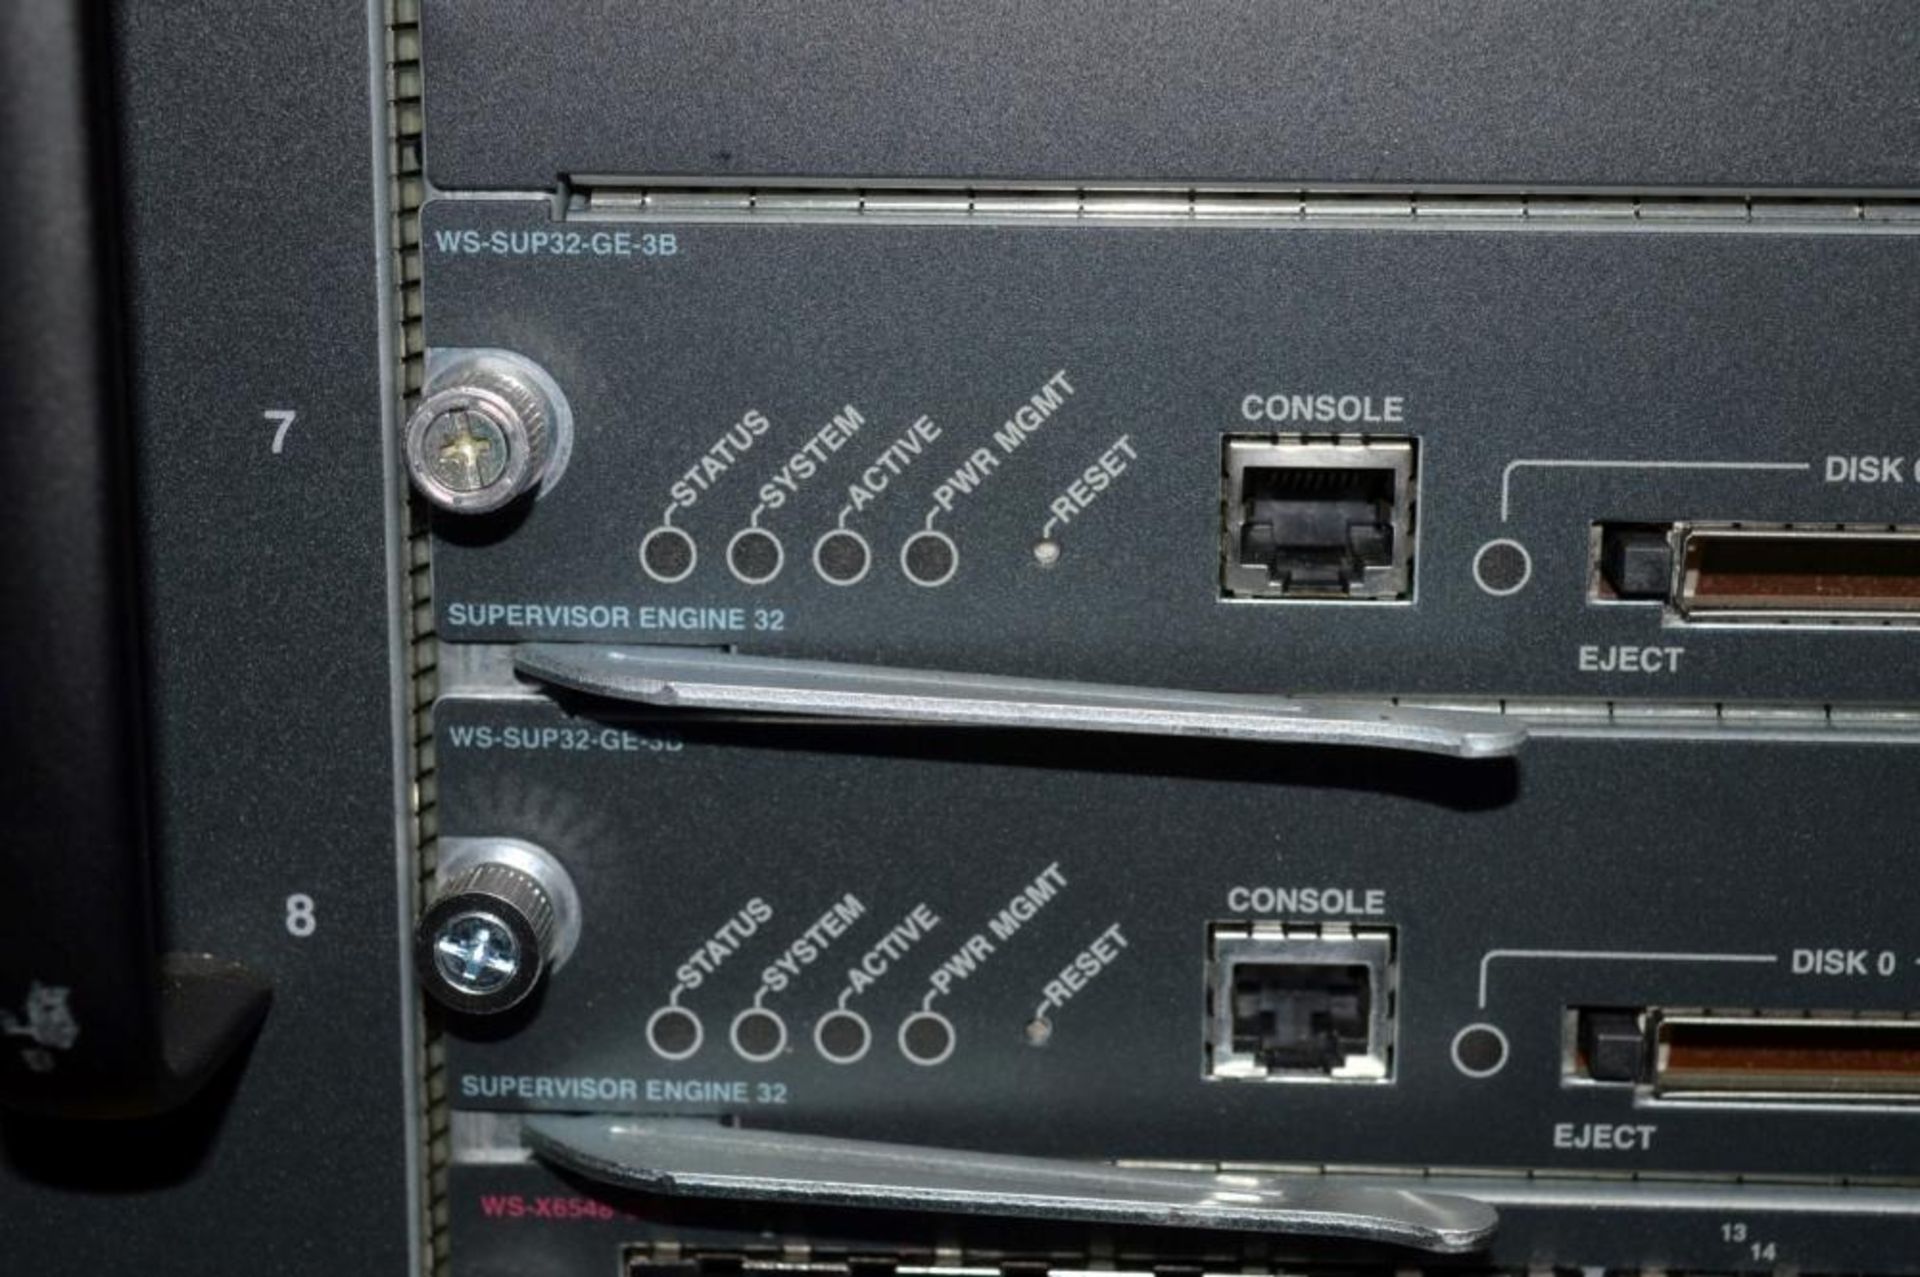 1 x Cisco Catalyst 6513 Switch Chassis With 2 x WS-SUP32-GE-3B Supervisor Engines and 3 x WS-X6548- - Image 9 of 10